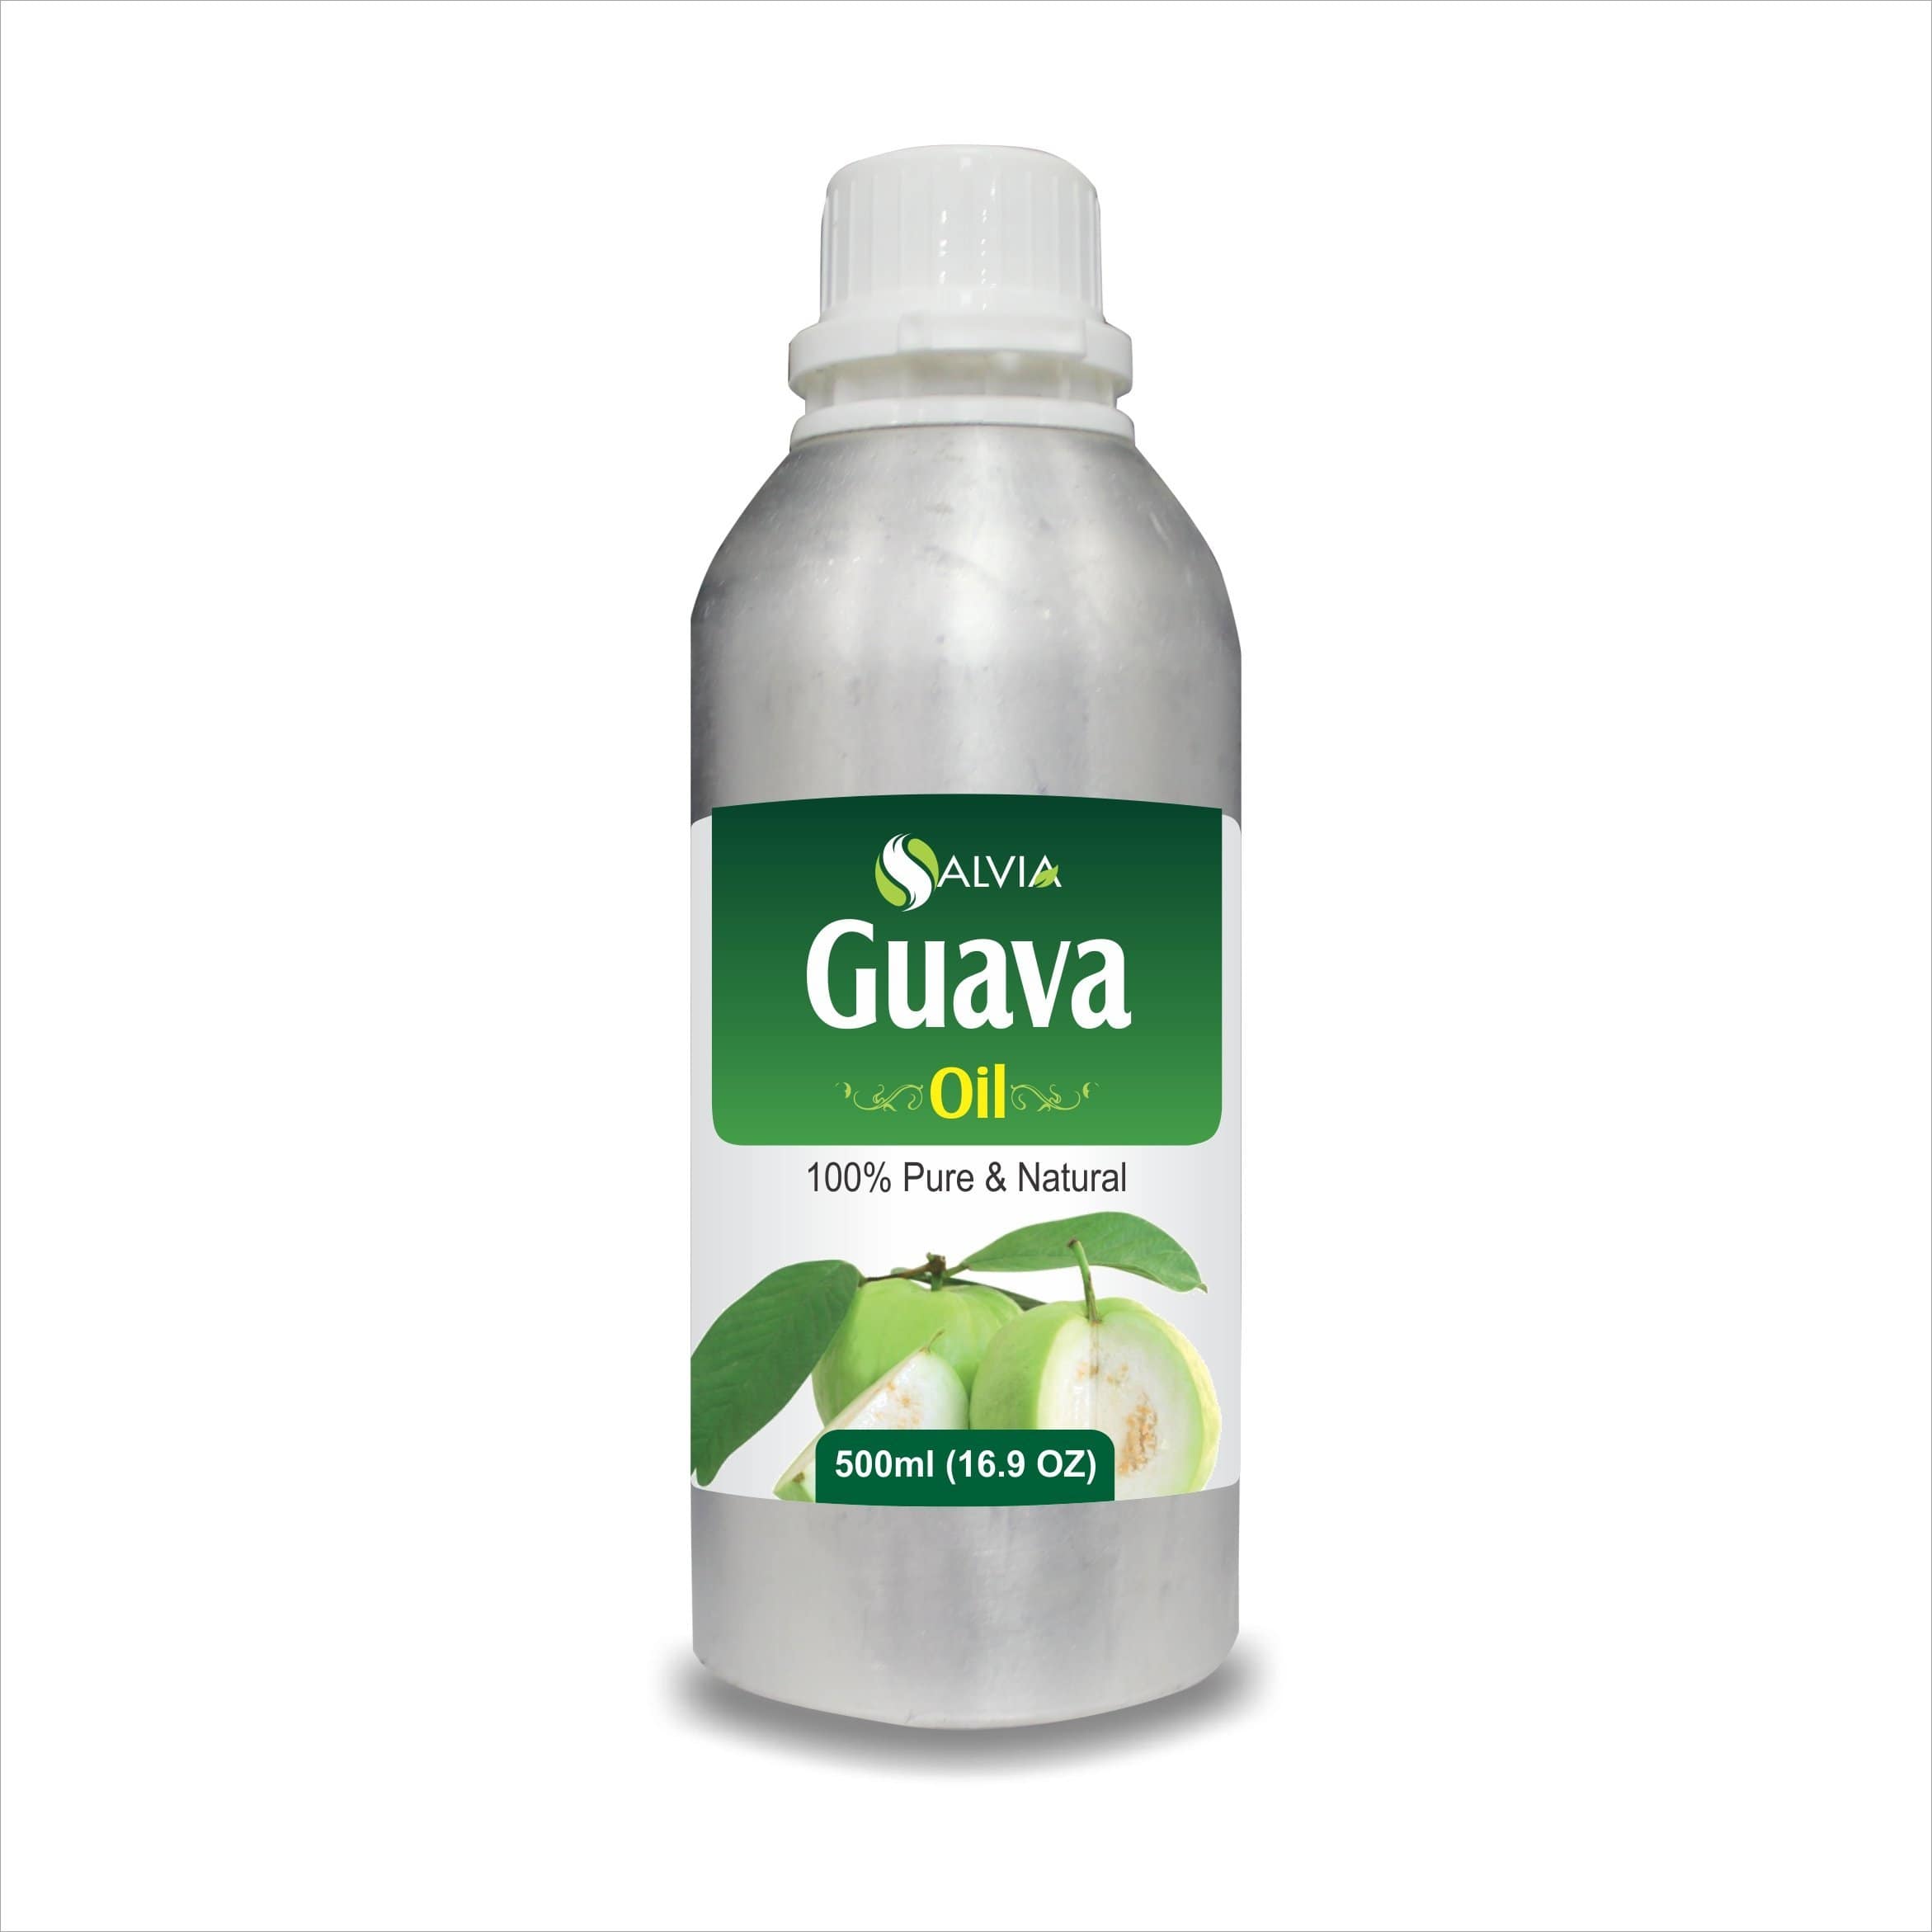 guava oil for hair